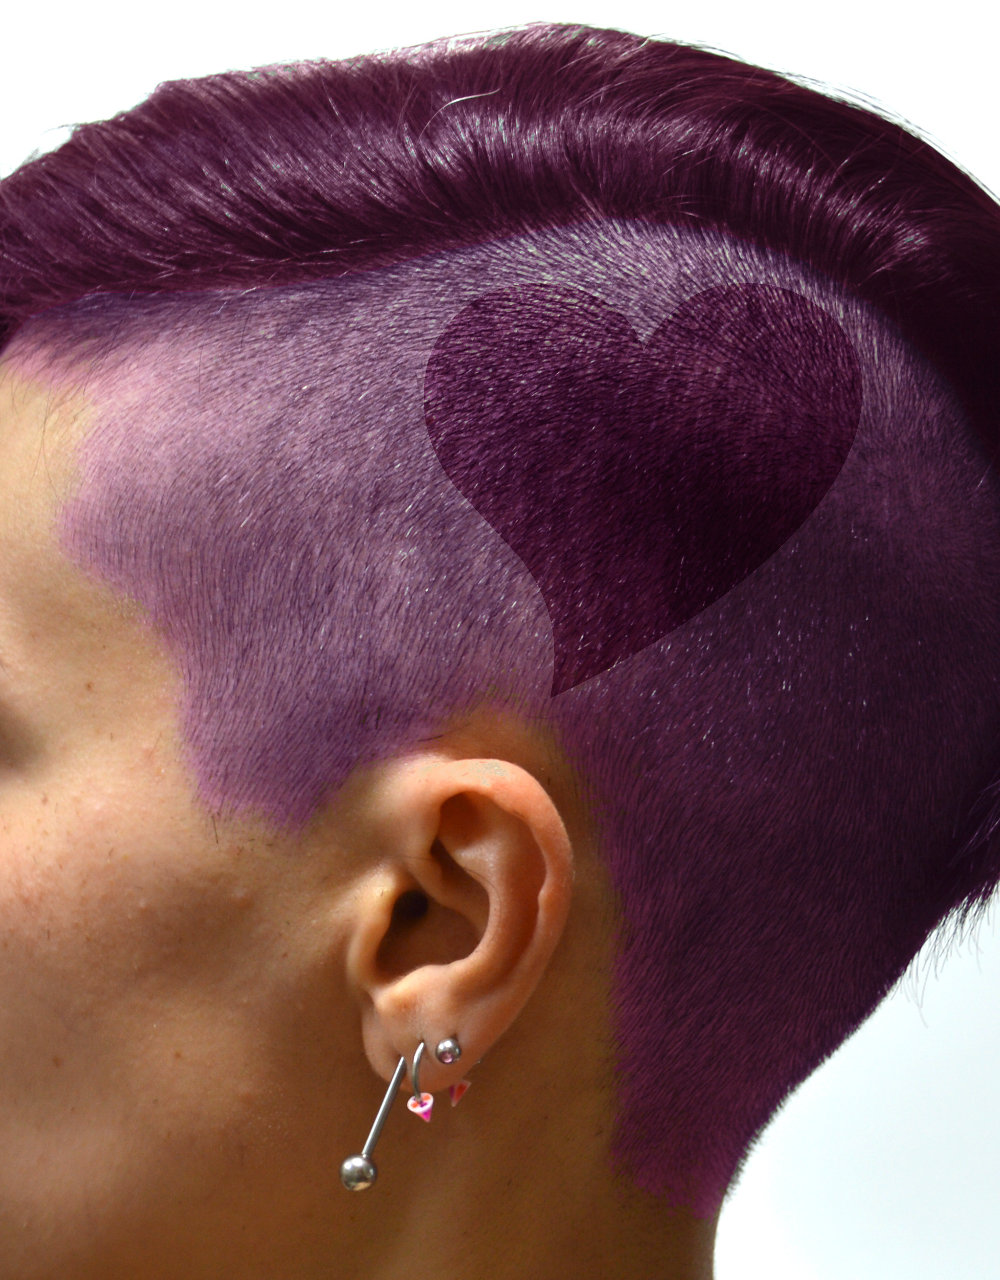 Create stunning hair art with the Barber Pencil